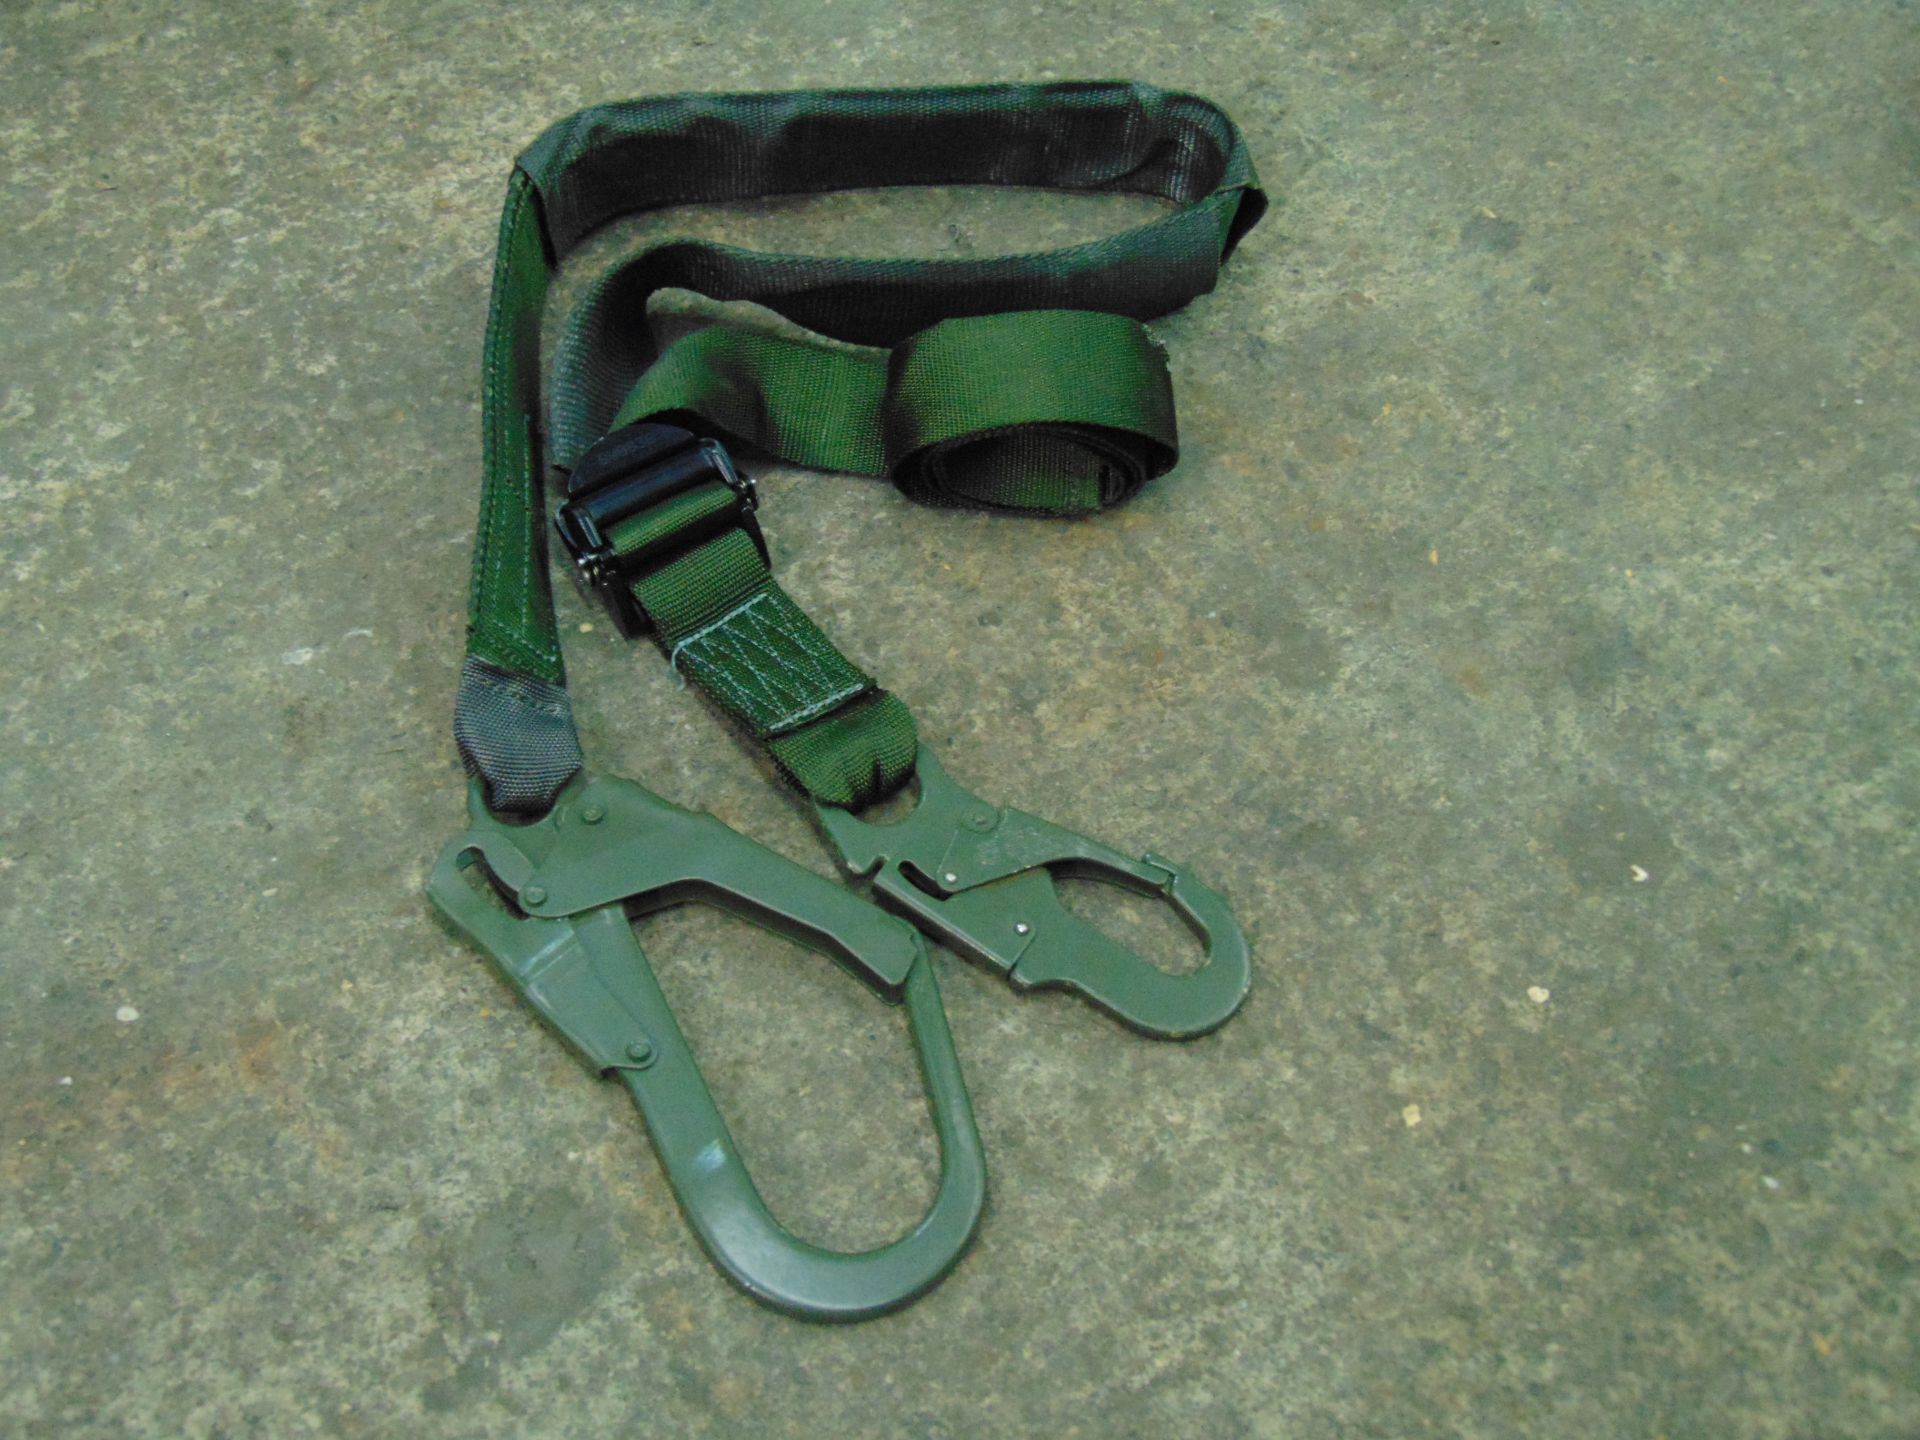 Spanset Full Body Harness with Work Position Lanyards etc - Image 10 of 24